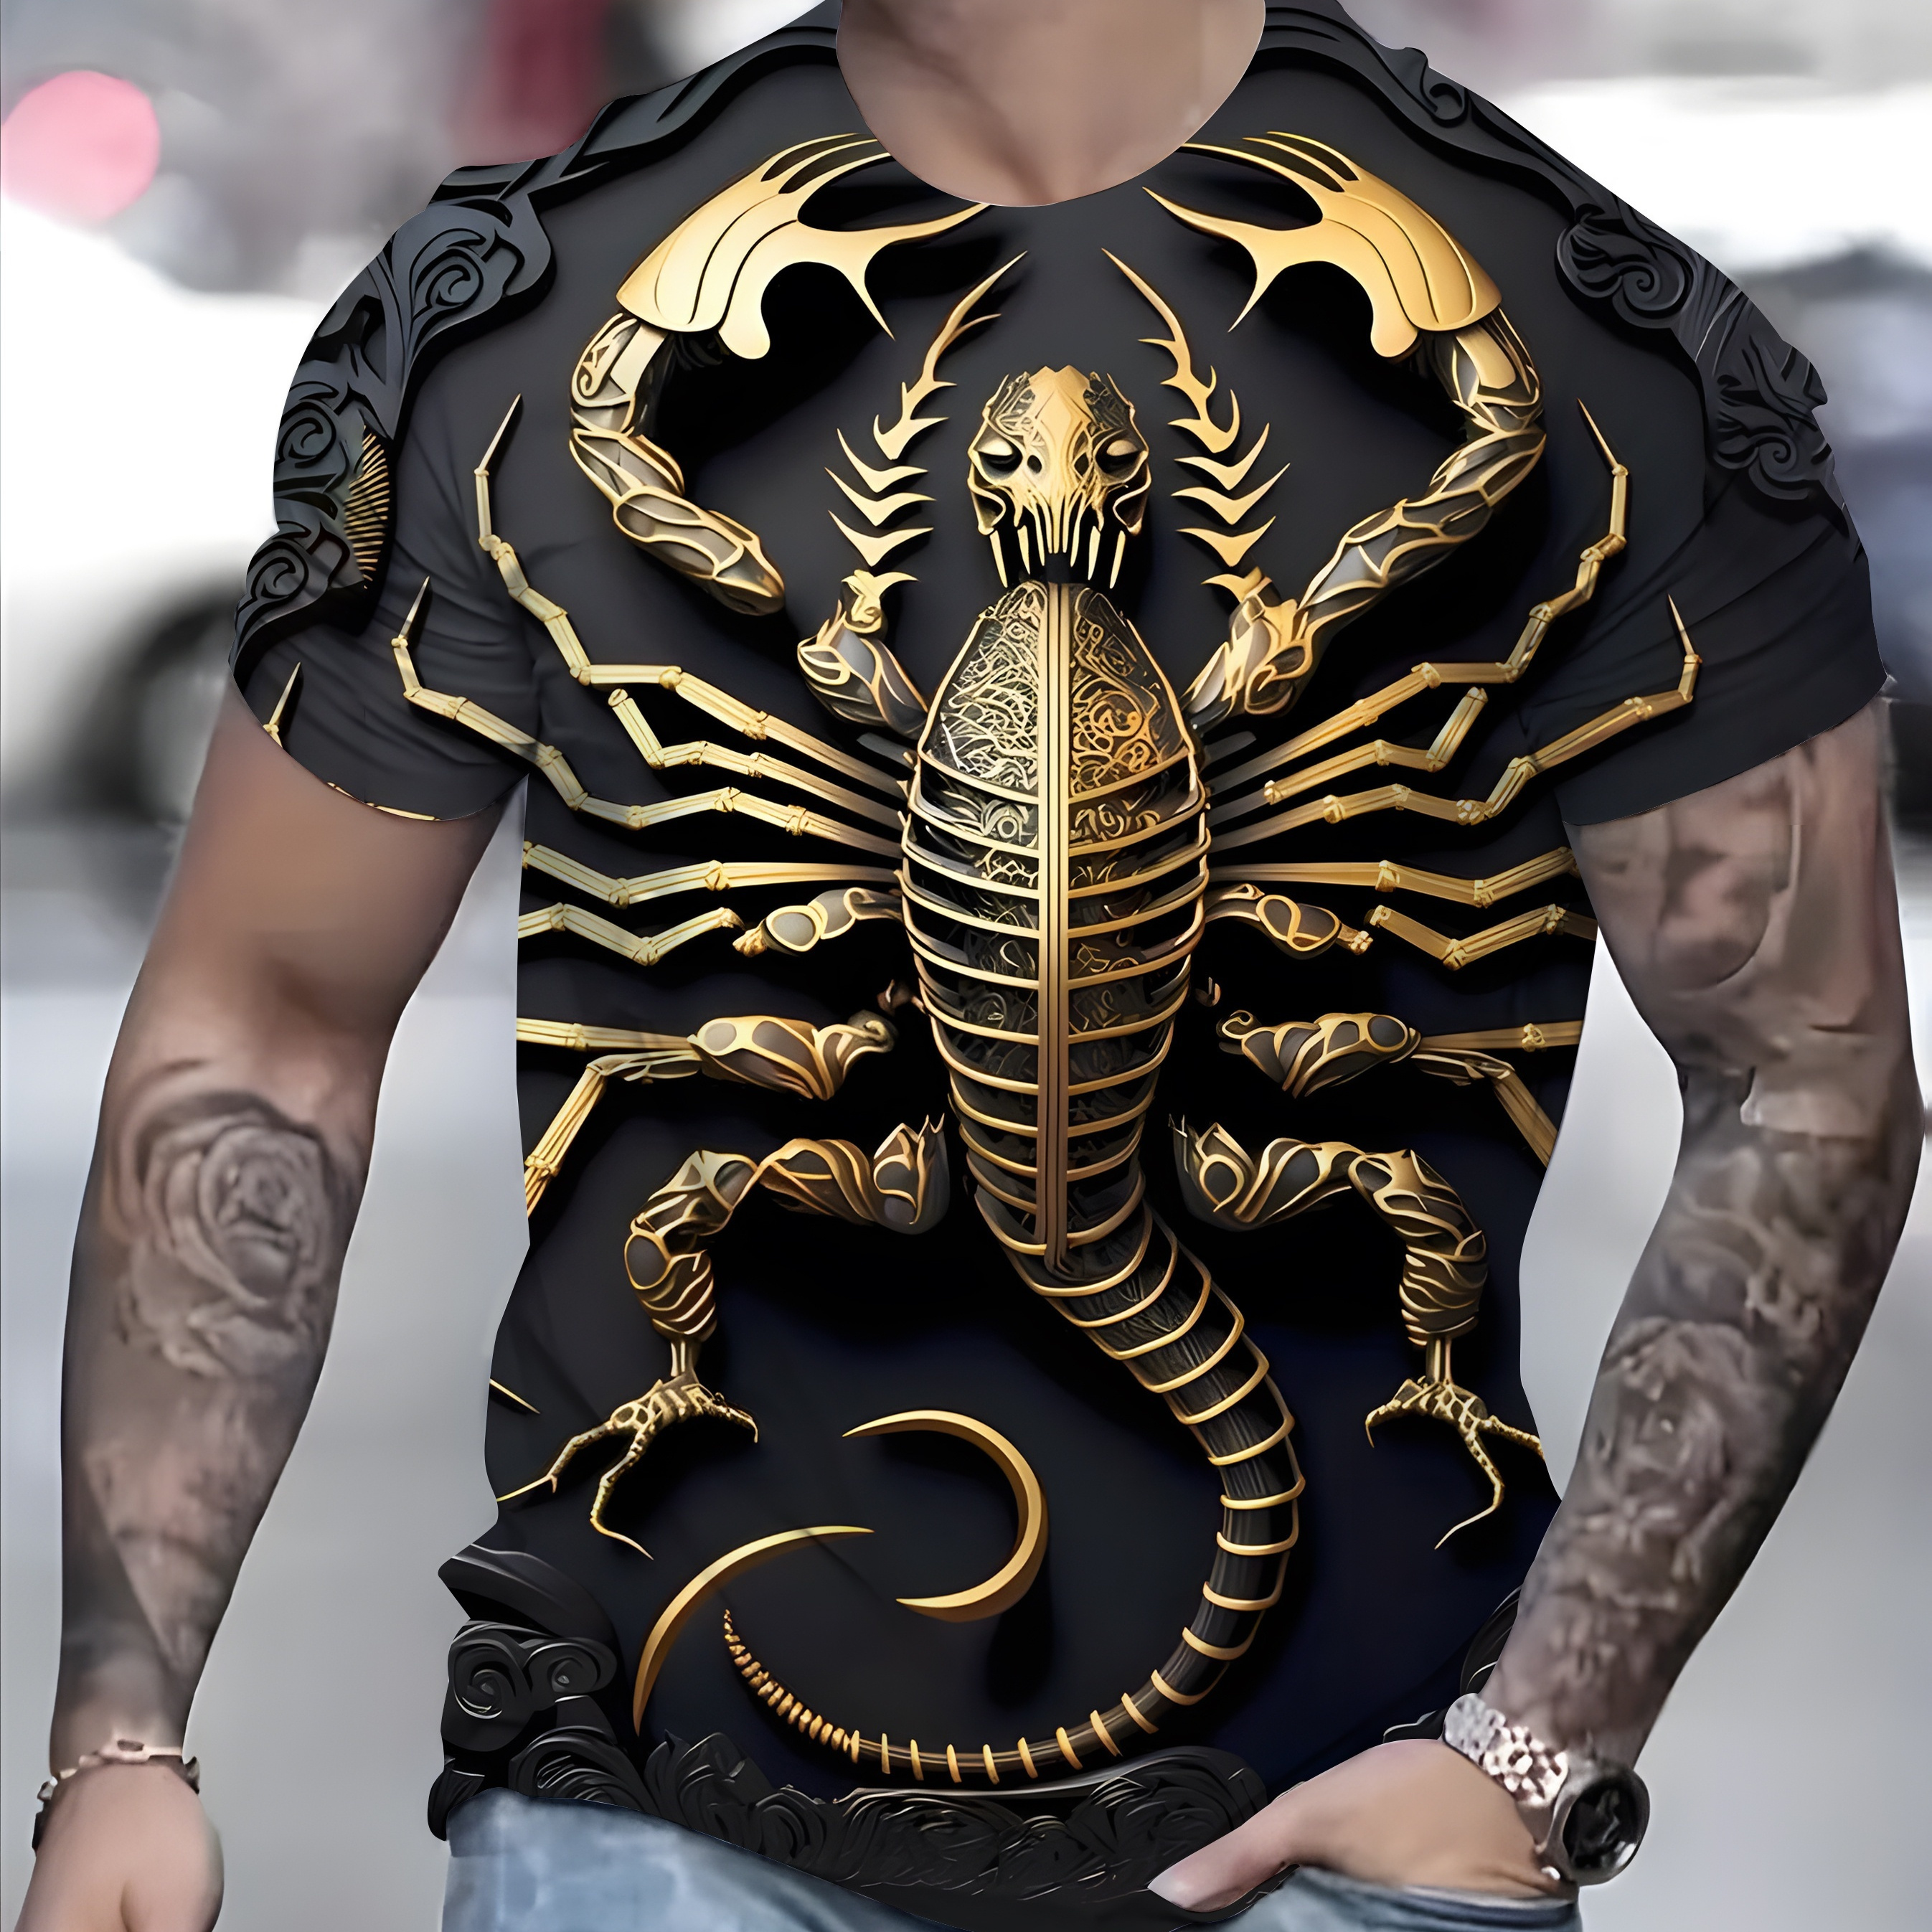 

Novelty Gold Spider Pattern 3d Printed Crew Neck Short Sleeve T-shirt For Men, Casual Summer T-shirt For Daily Wear And Vacation Resorts